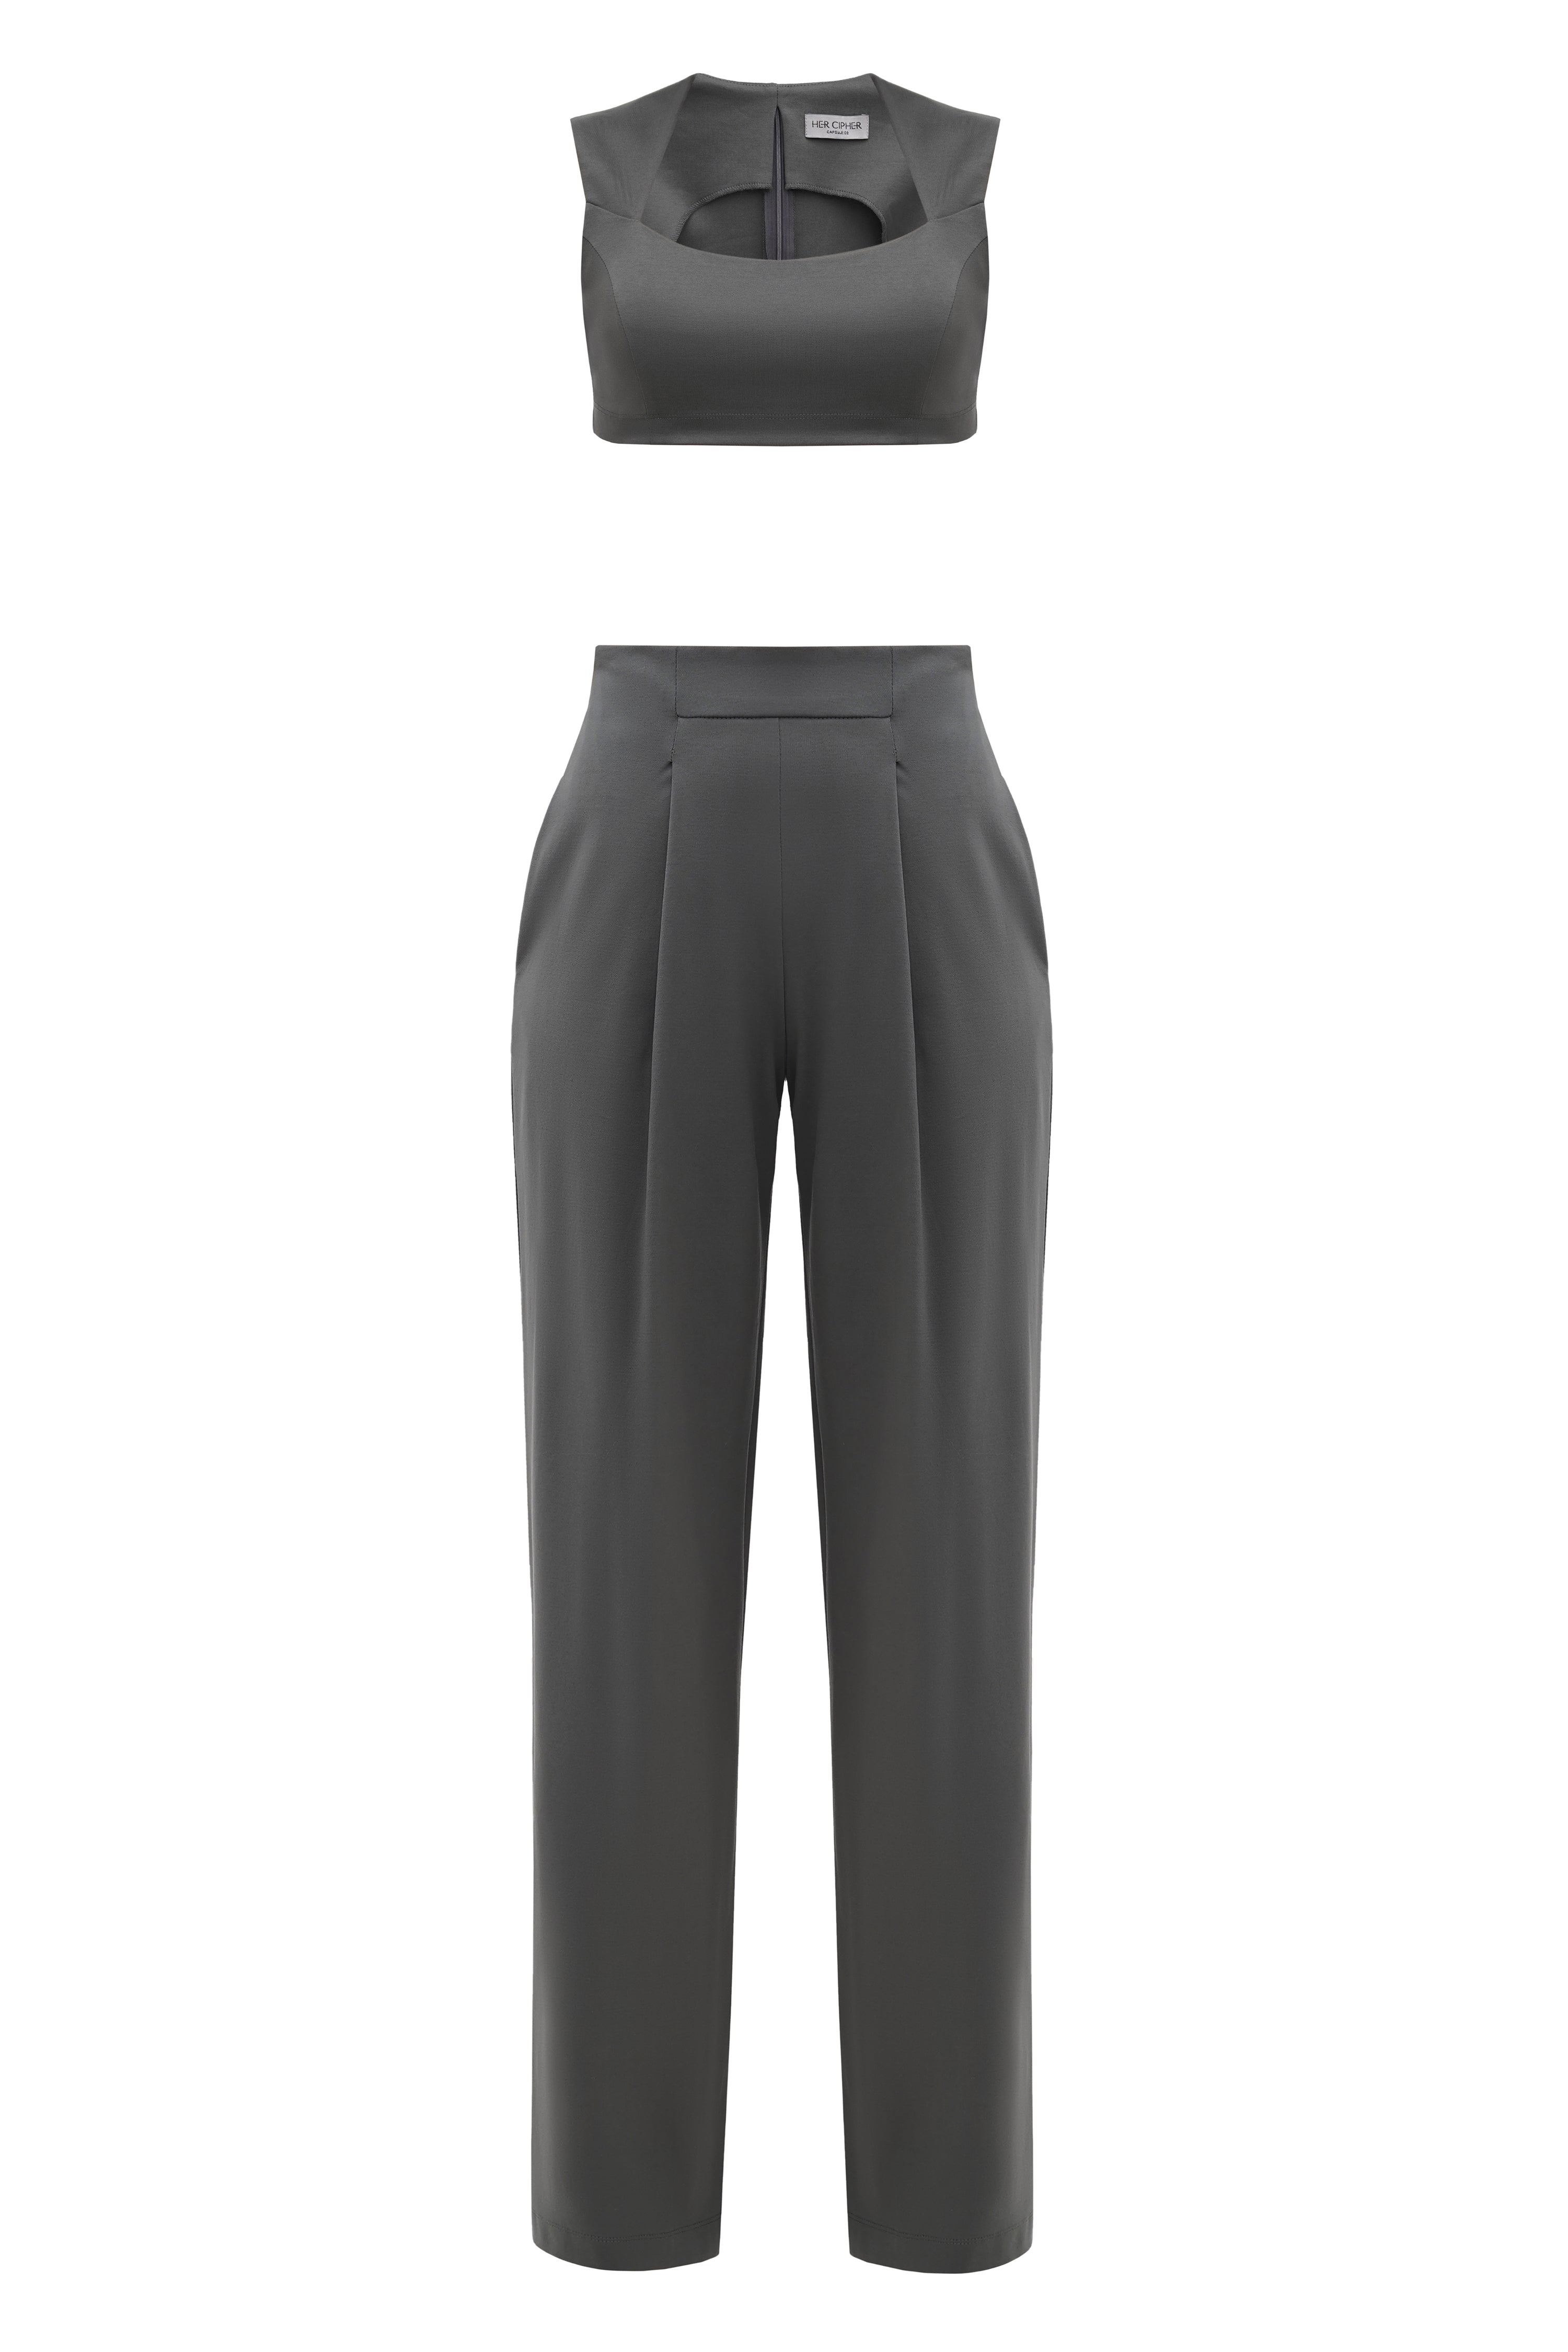 A set of a crop top with square neckline and wide straps and high waisted wide leg pants with front pleats and hidden pockets by HER CIPHER in color dark grey